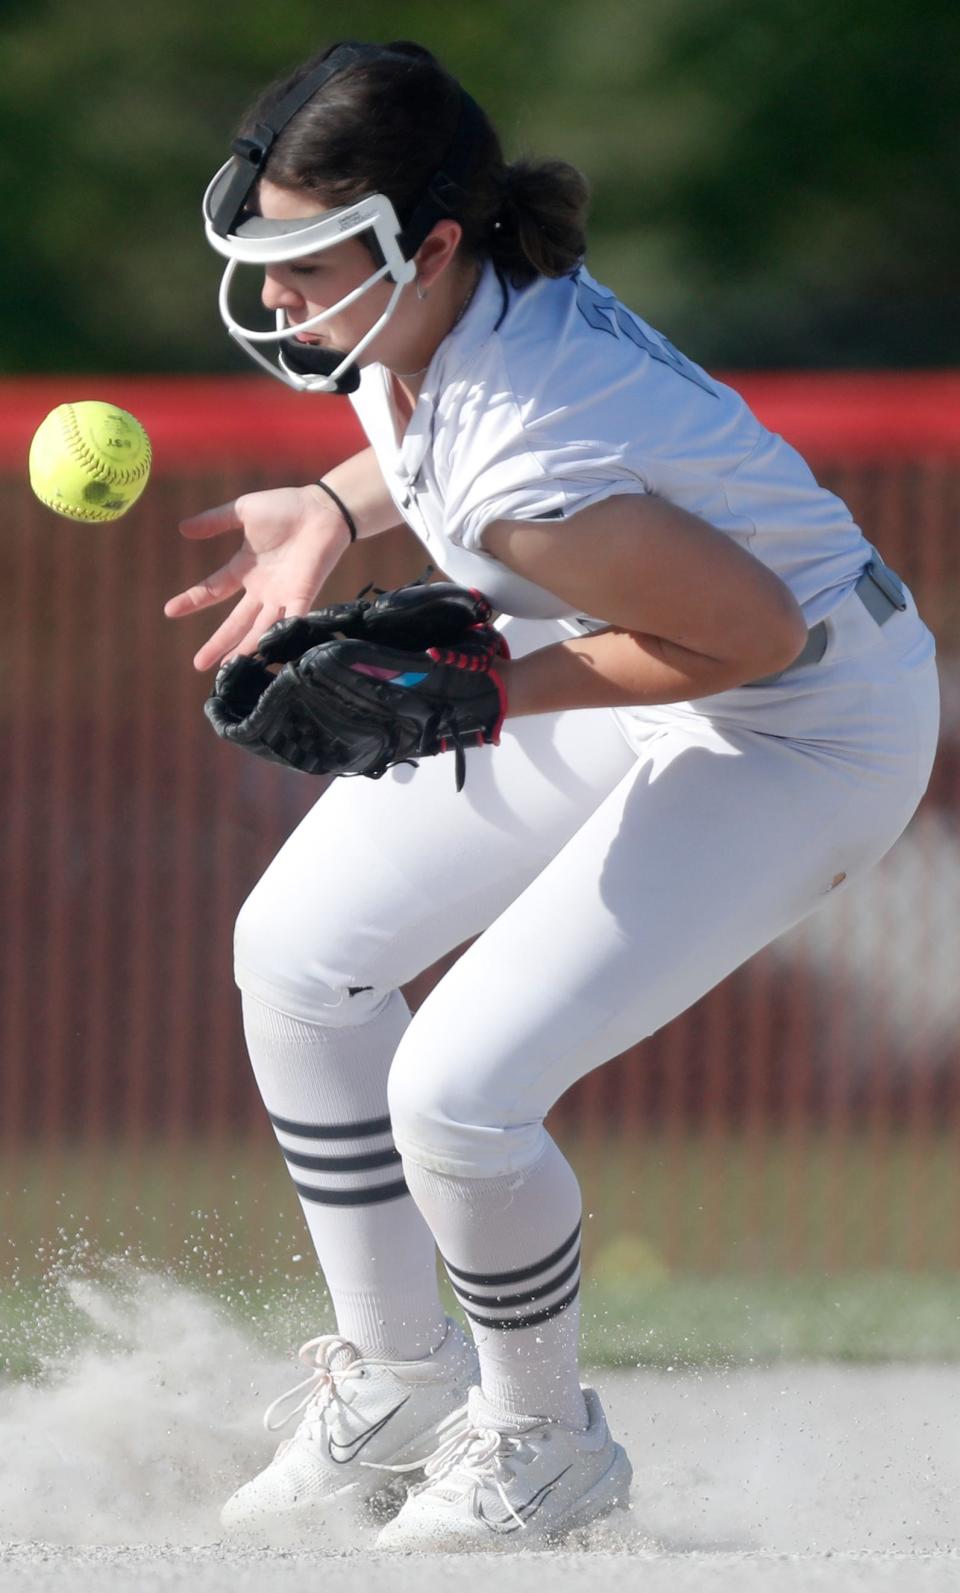 West Lafayette Red Devils Ellie Wilcoxson (2) goes to field a ground ball during the IHSAA softball game against the Tri-County Cavaliers, Wednesday, May 10, 2023, at West Lafayette High School in West Lafayette, Ind. West Lafayette won 15-7.